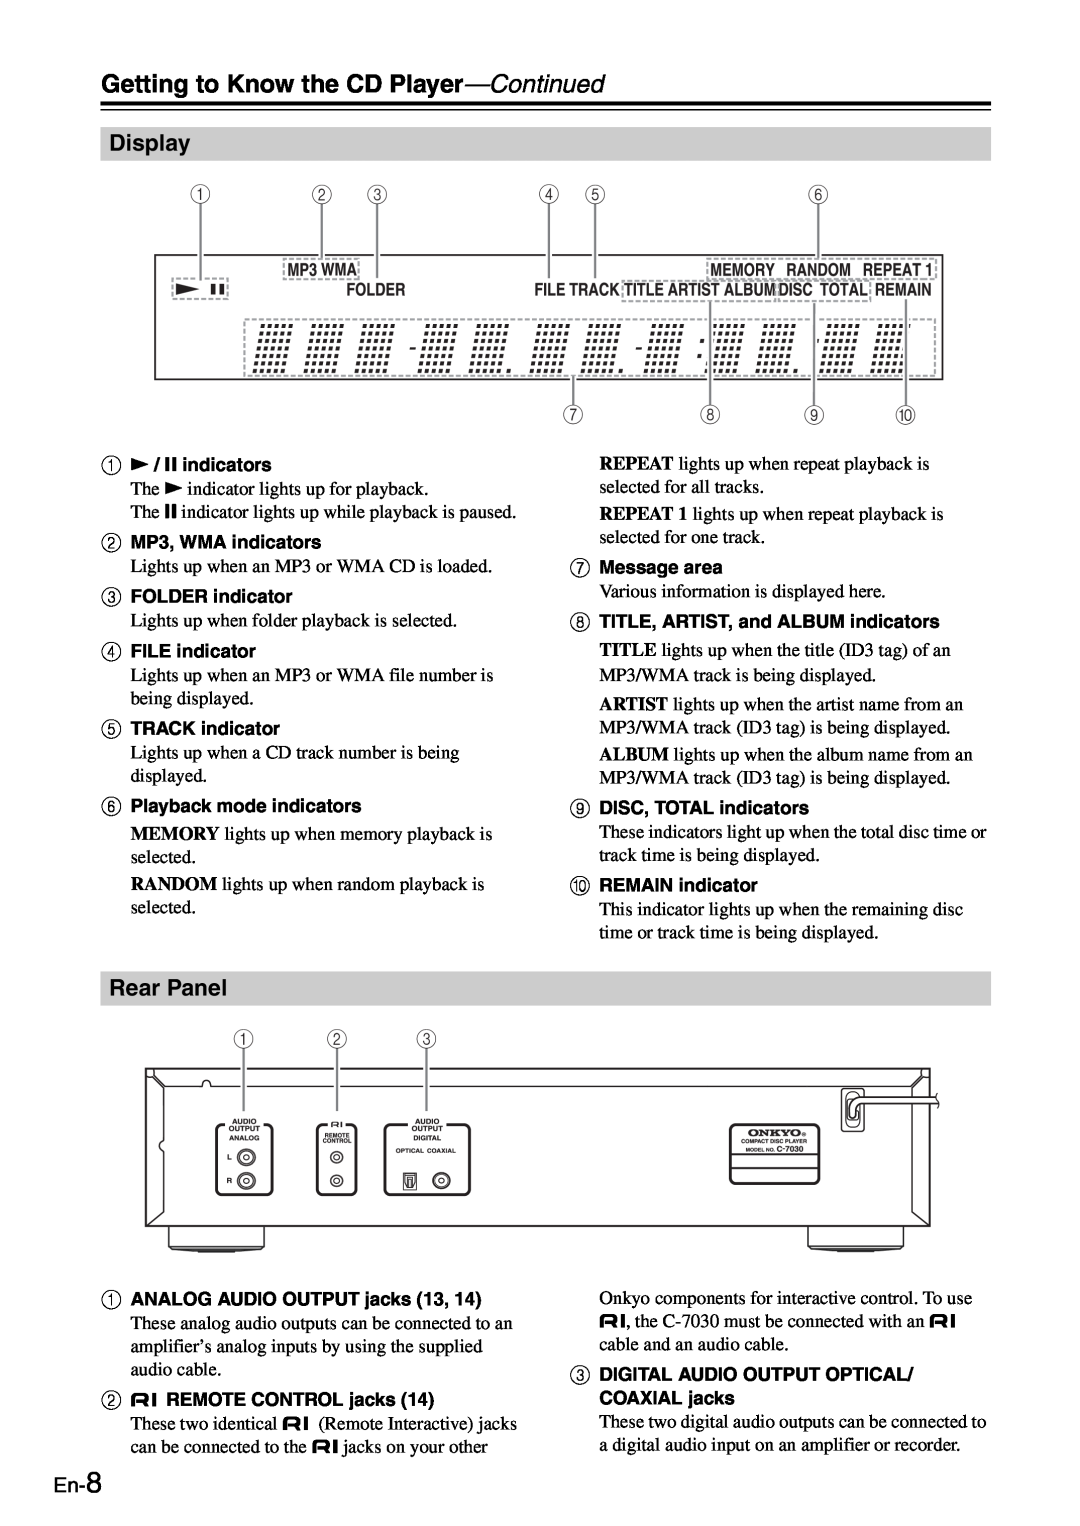 Onkyo C-7030 instruction manual Getting to Know the CD Player-Continued, Display, Rear Panel, En-8 